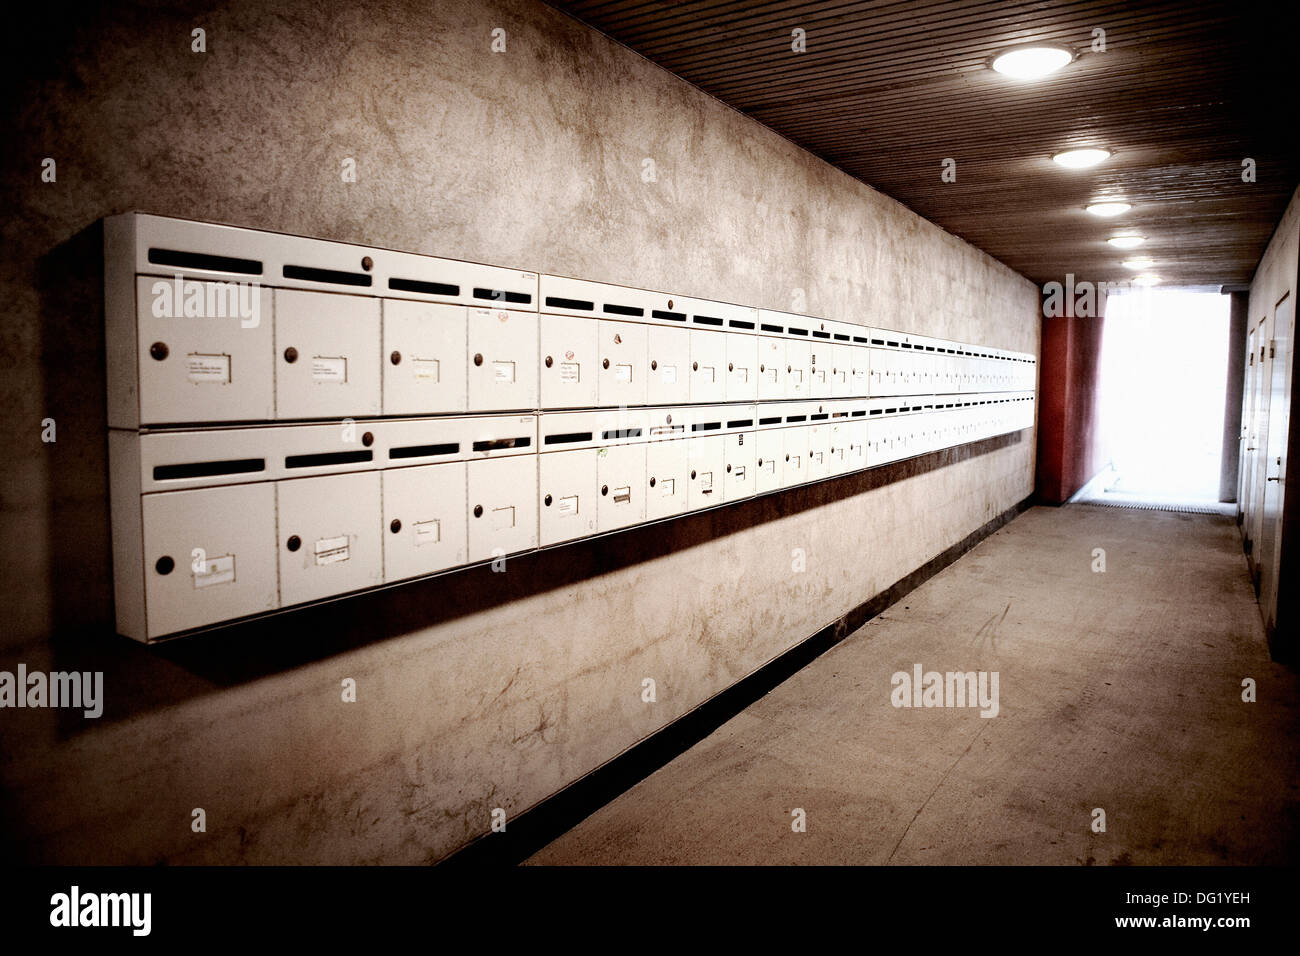 Two Rows of Mailboxes in Apartment Building Hallway Stock Photo